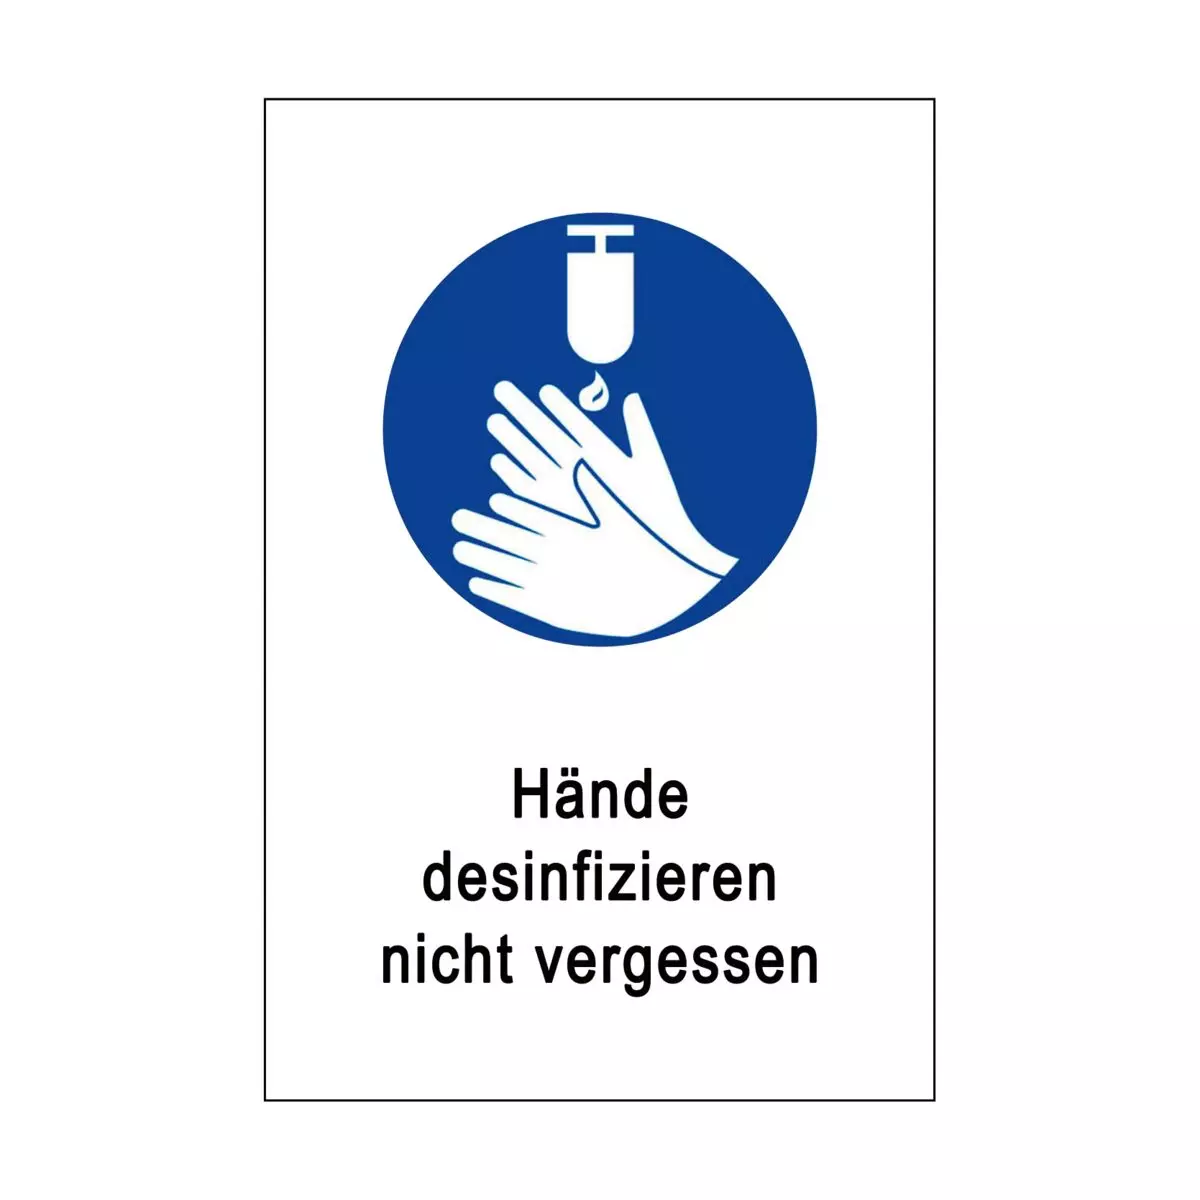 Information sign: Don't forget to disinfect your hands - foil